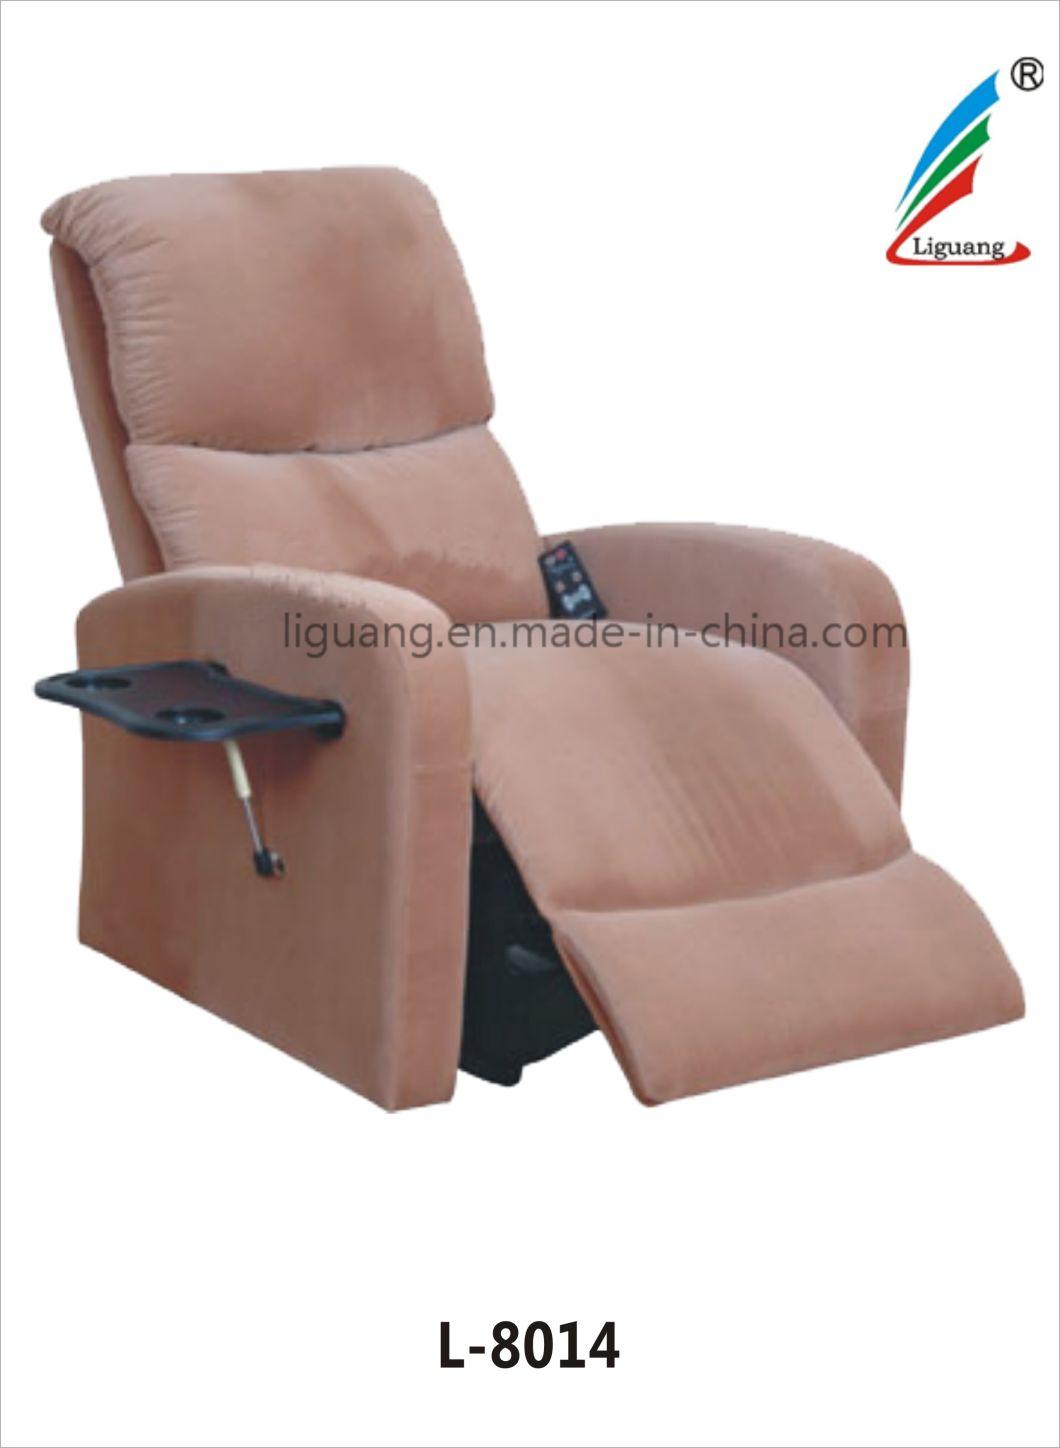 in 2018, Jialin′s New Special Offer, Simple Foot Massage Chair